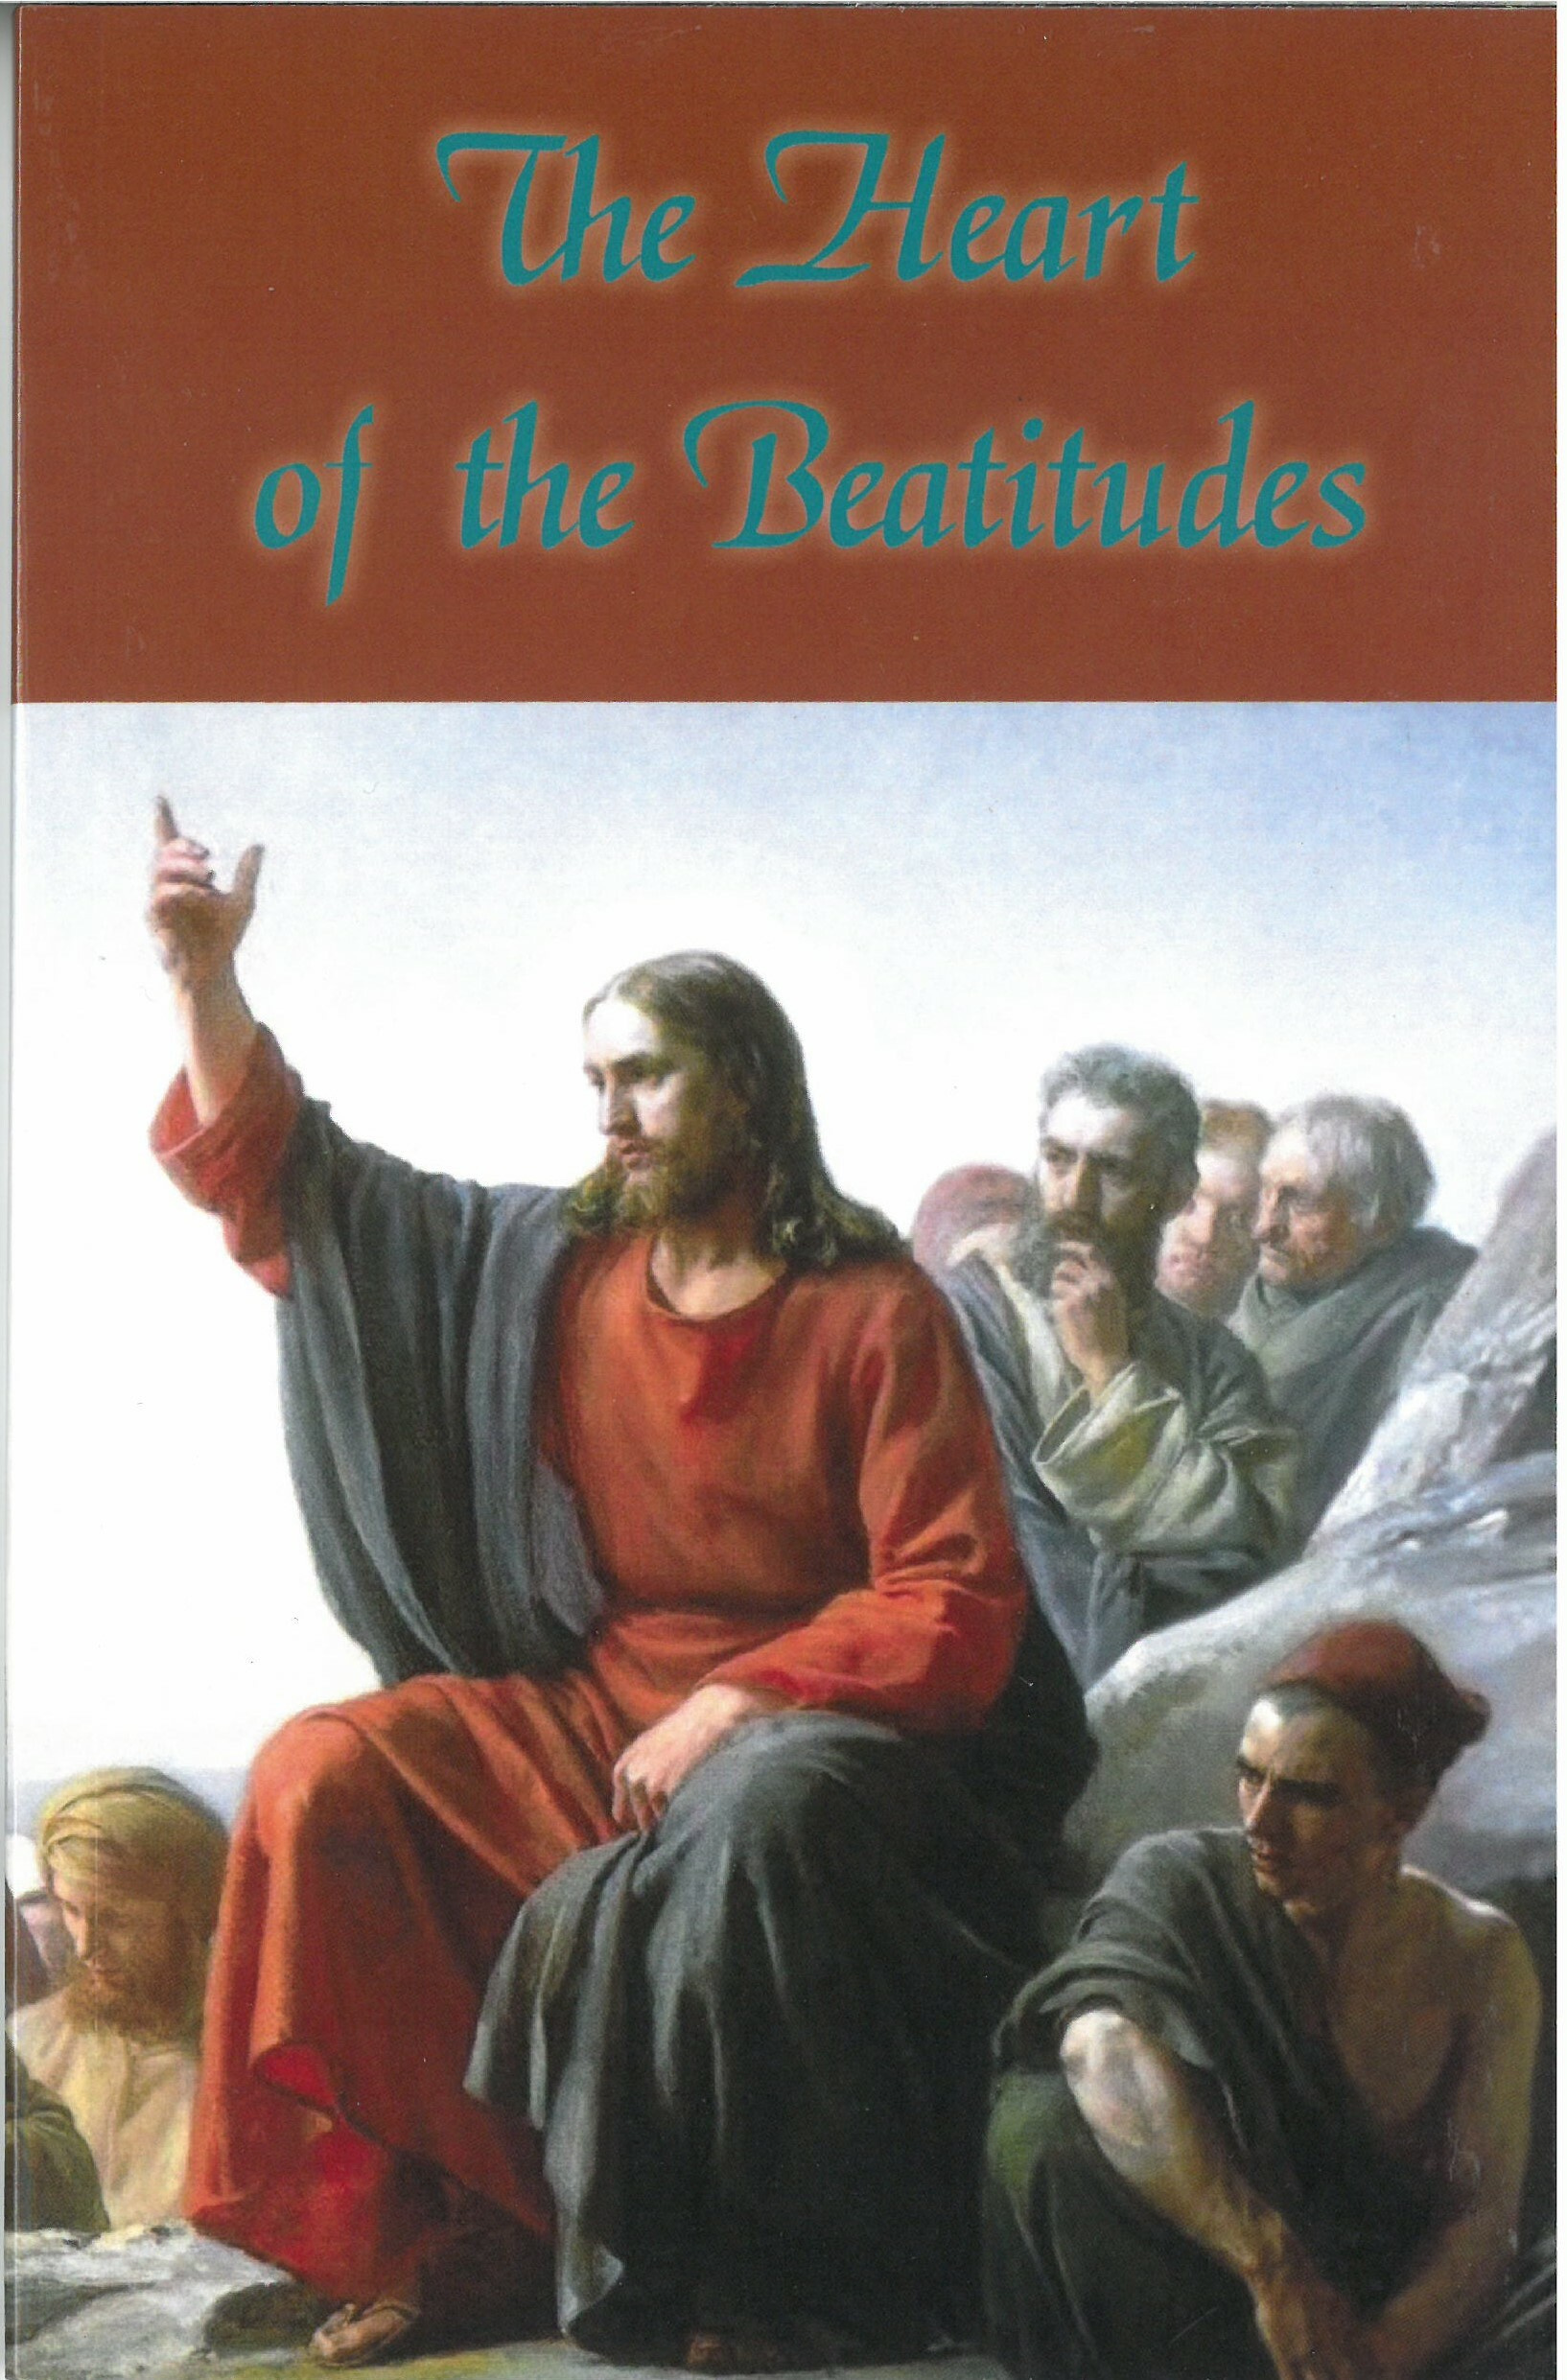 The Heart of the Beatitudes